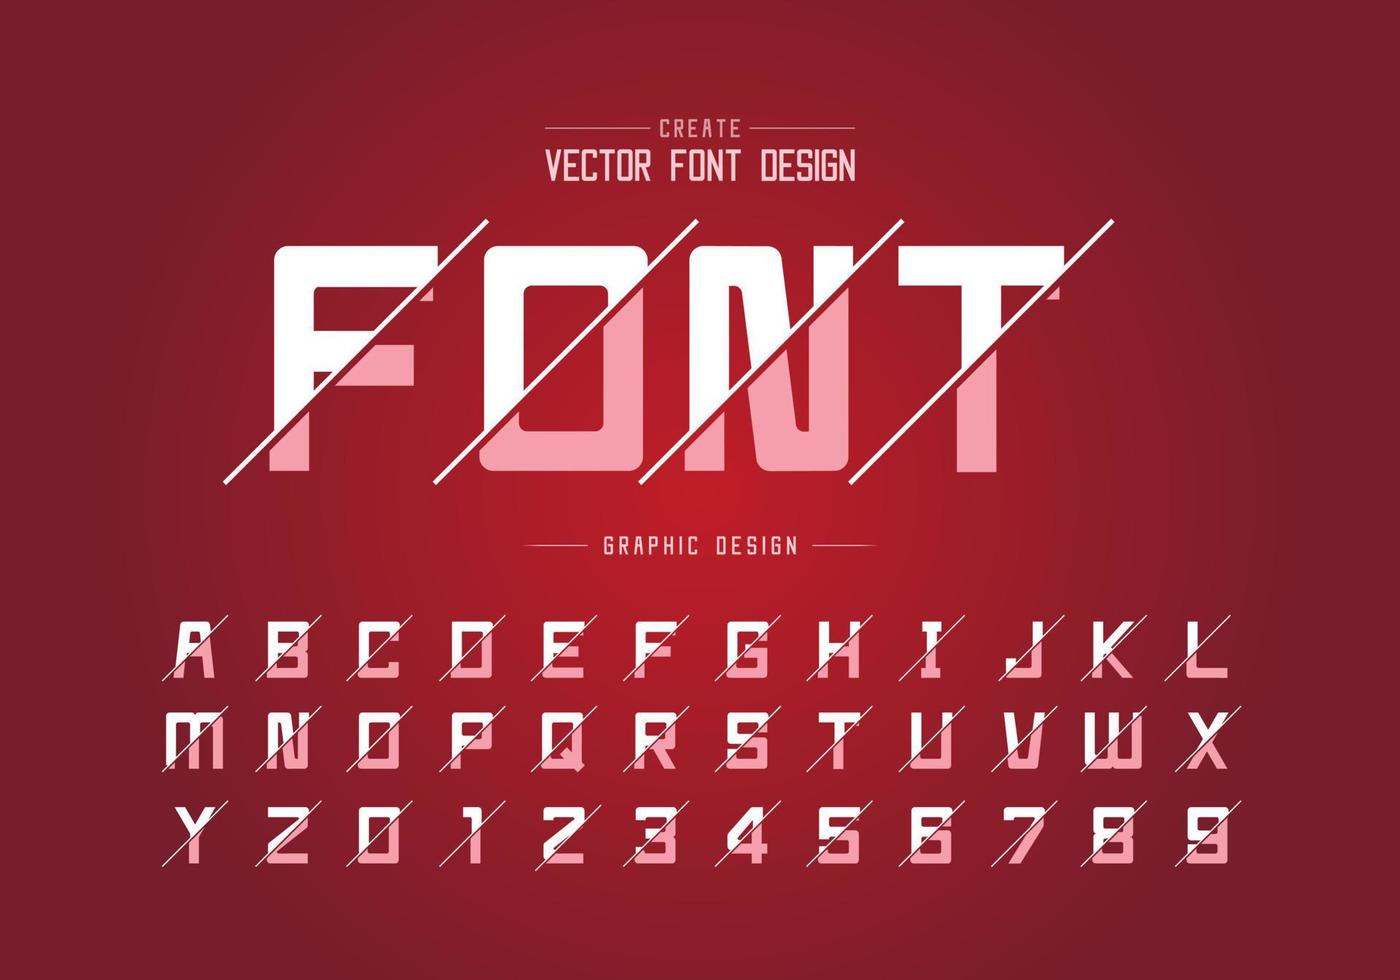 Font and alphabet vector, Square typeface letter and number design, Graphic text on background vector